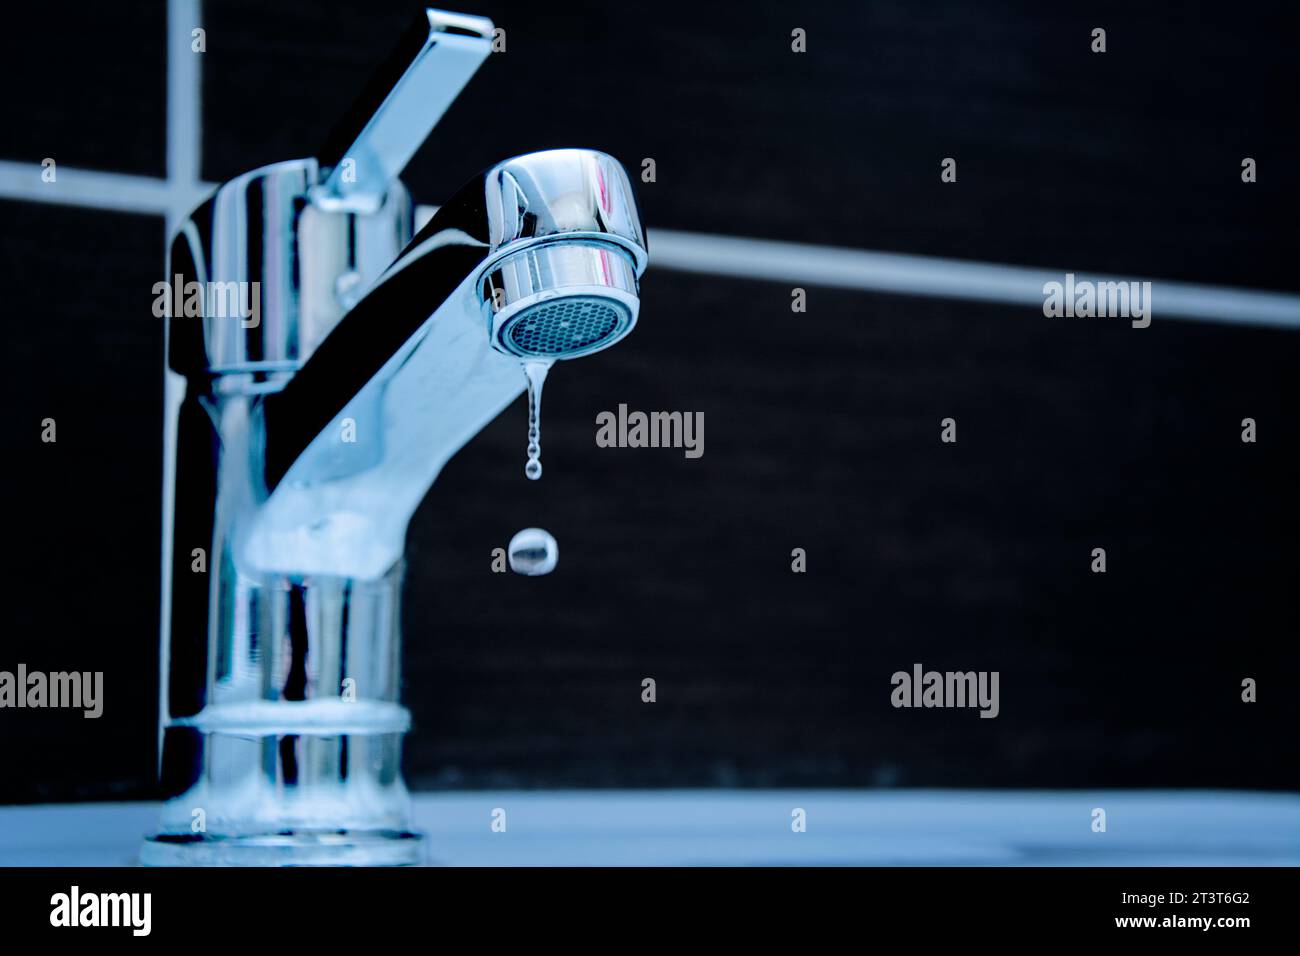 Drop of water from a leaky faucet close-up Stock Photo